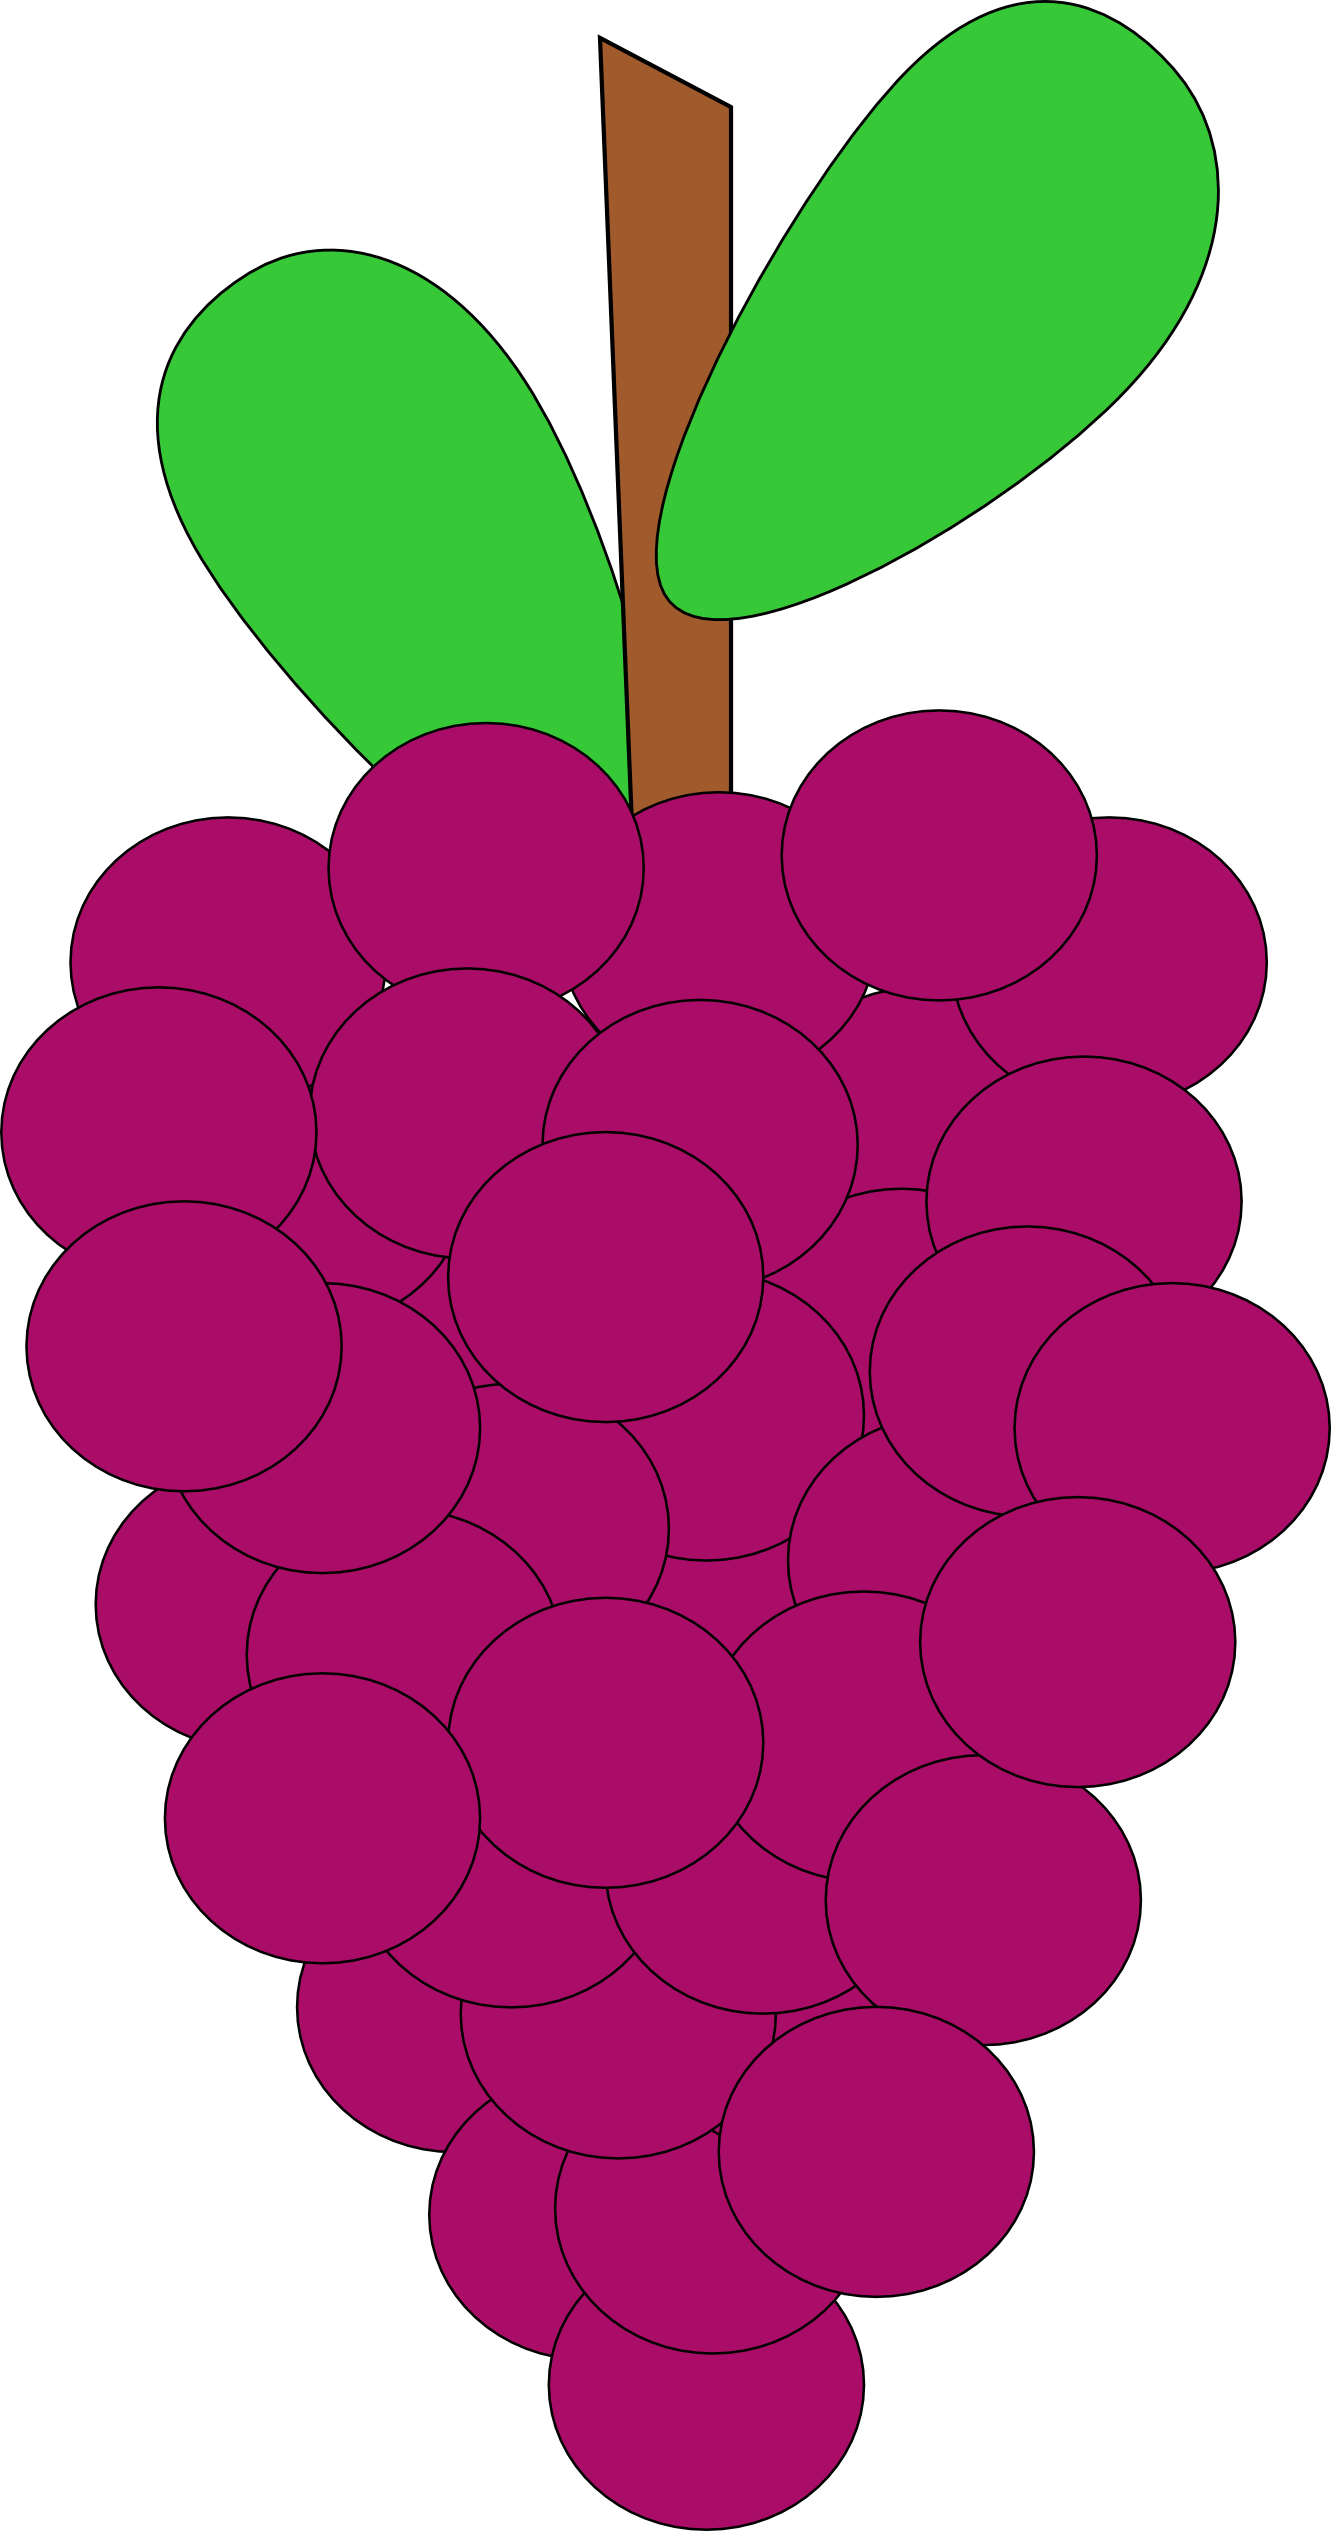 clip art pictures of grapes - photo #31